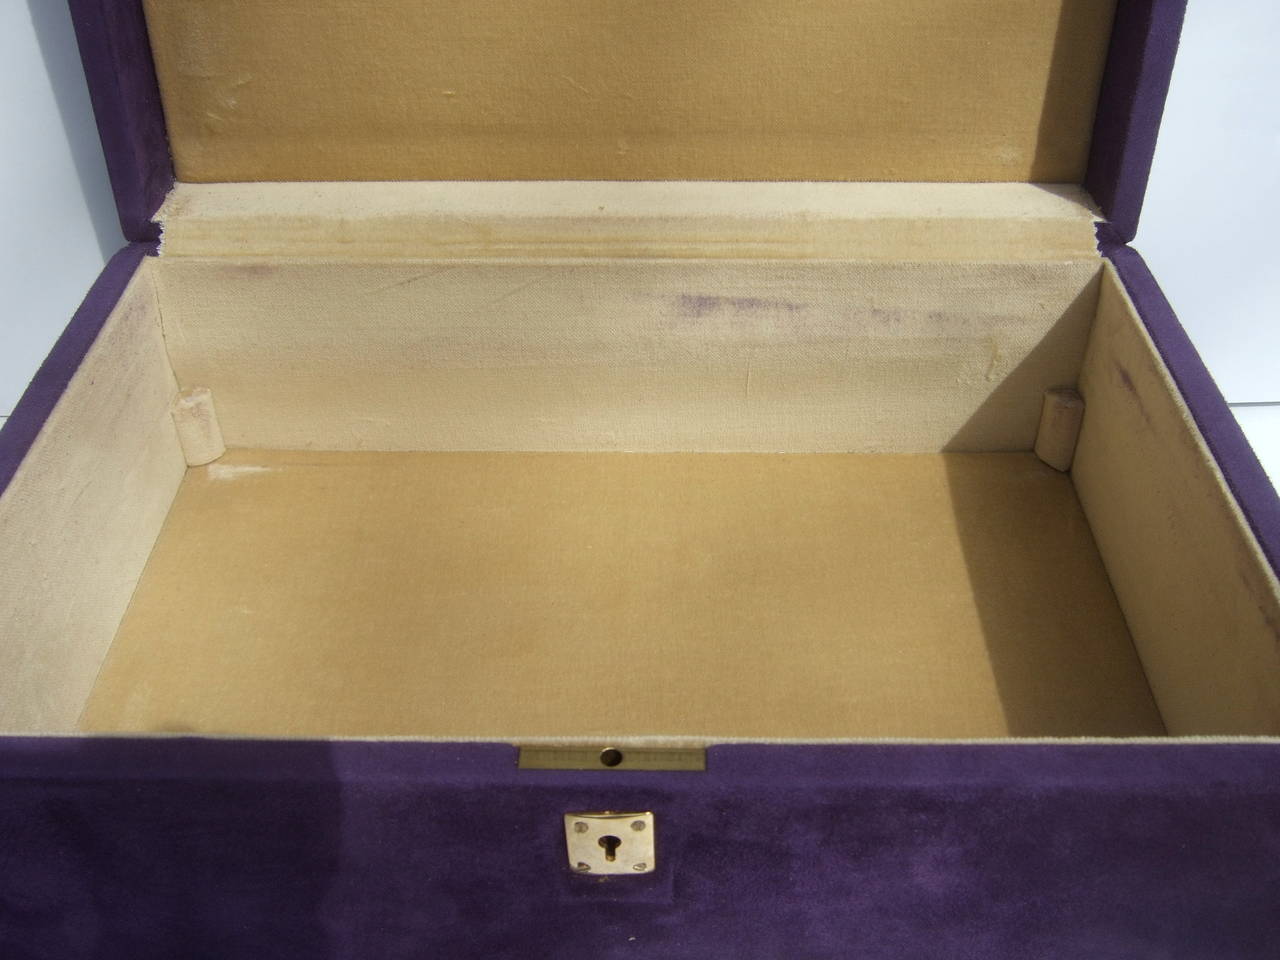 Neiman Marcus Set of Violet Suede Jewelry Boxes Made in Italy 2